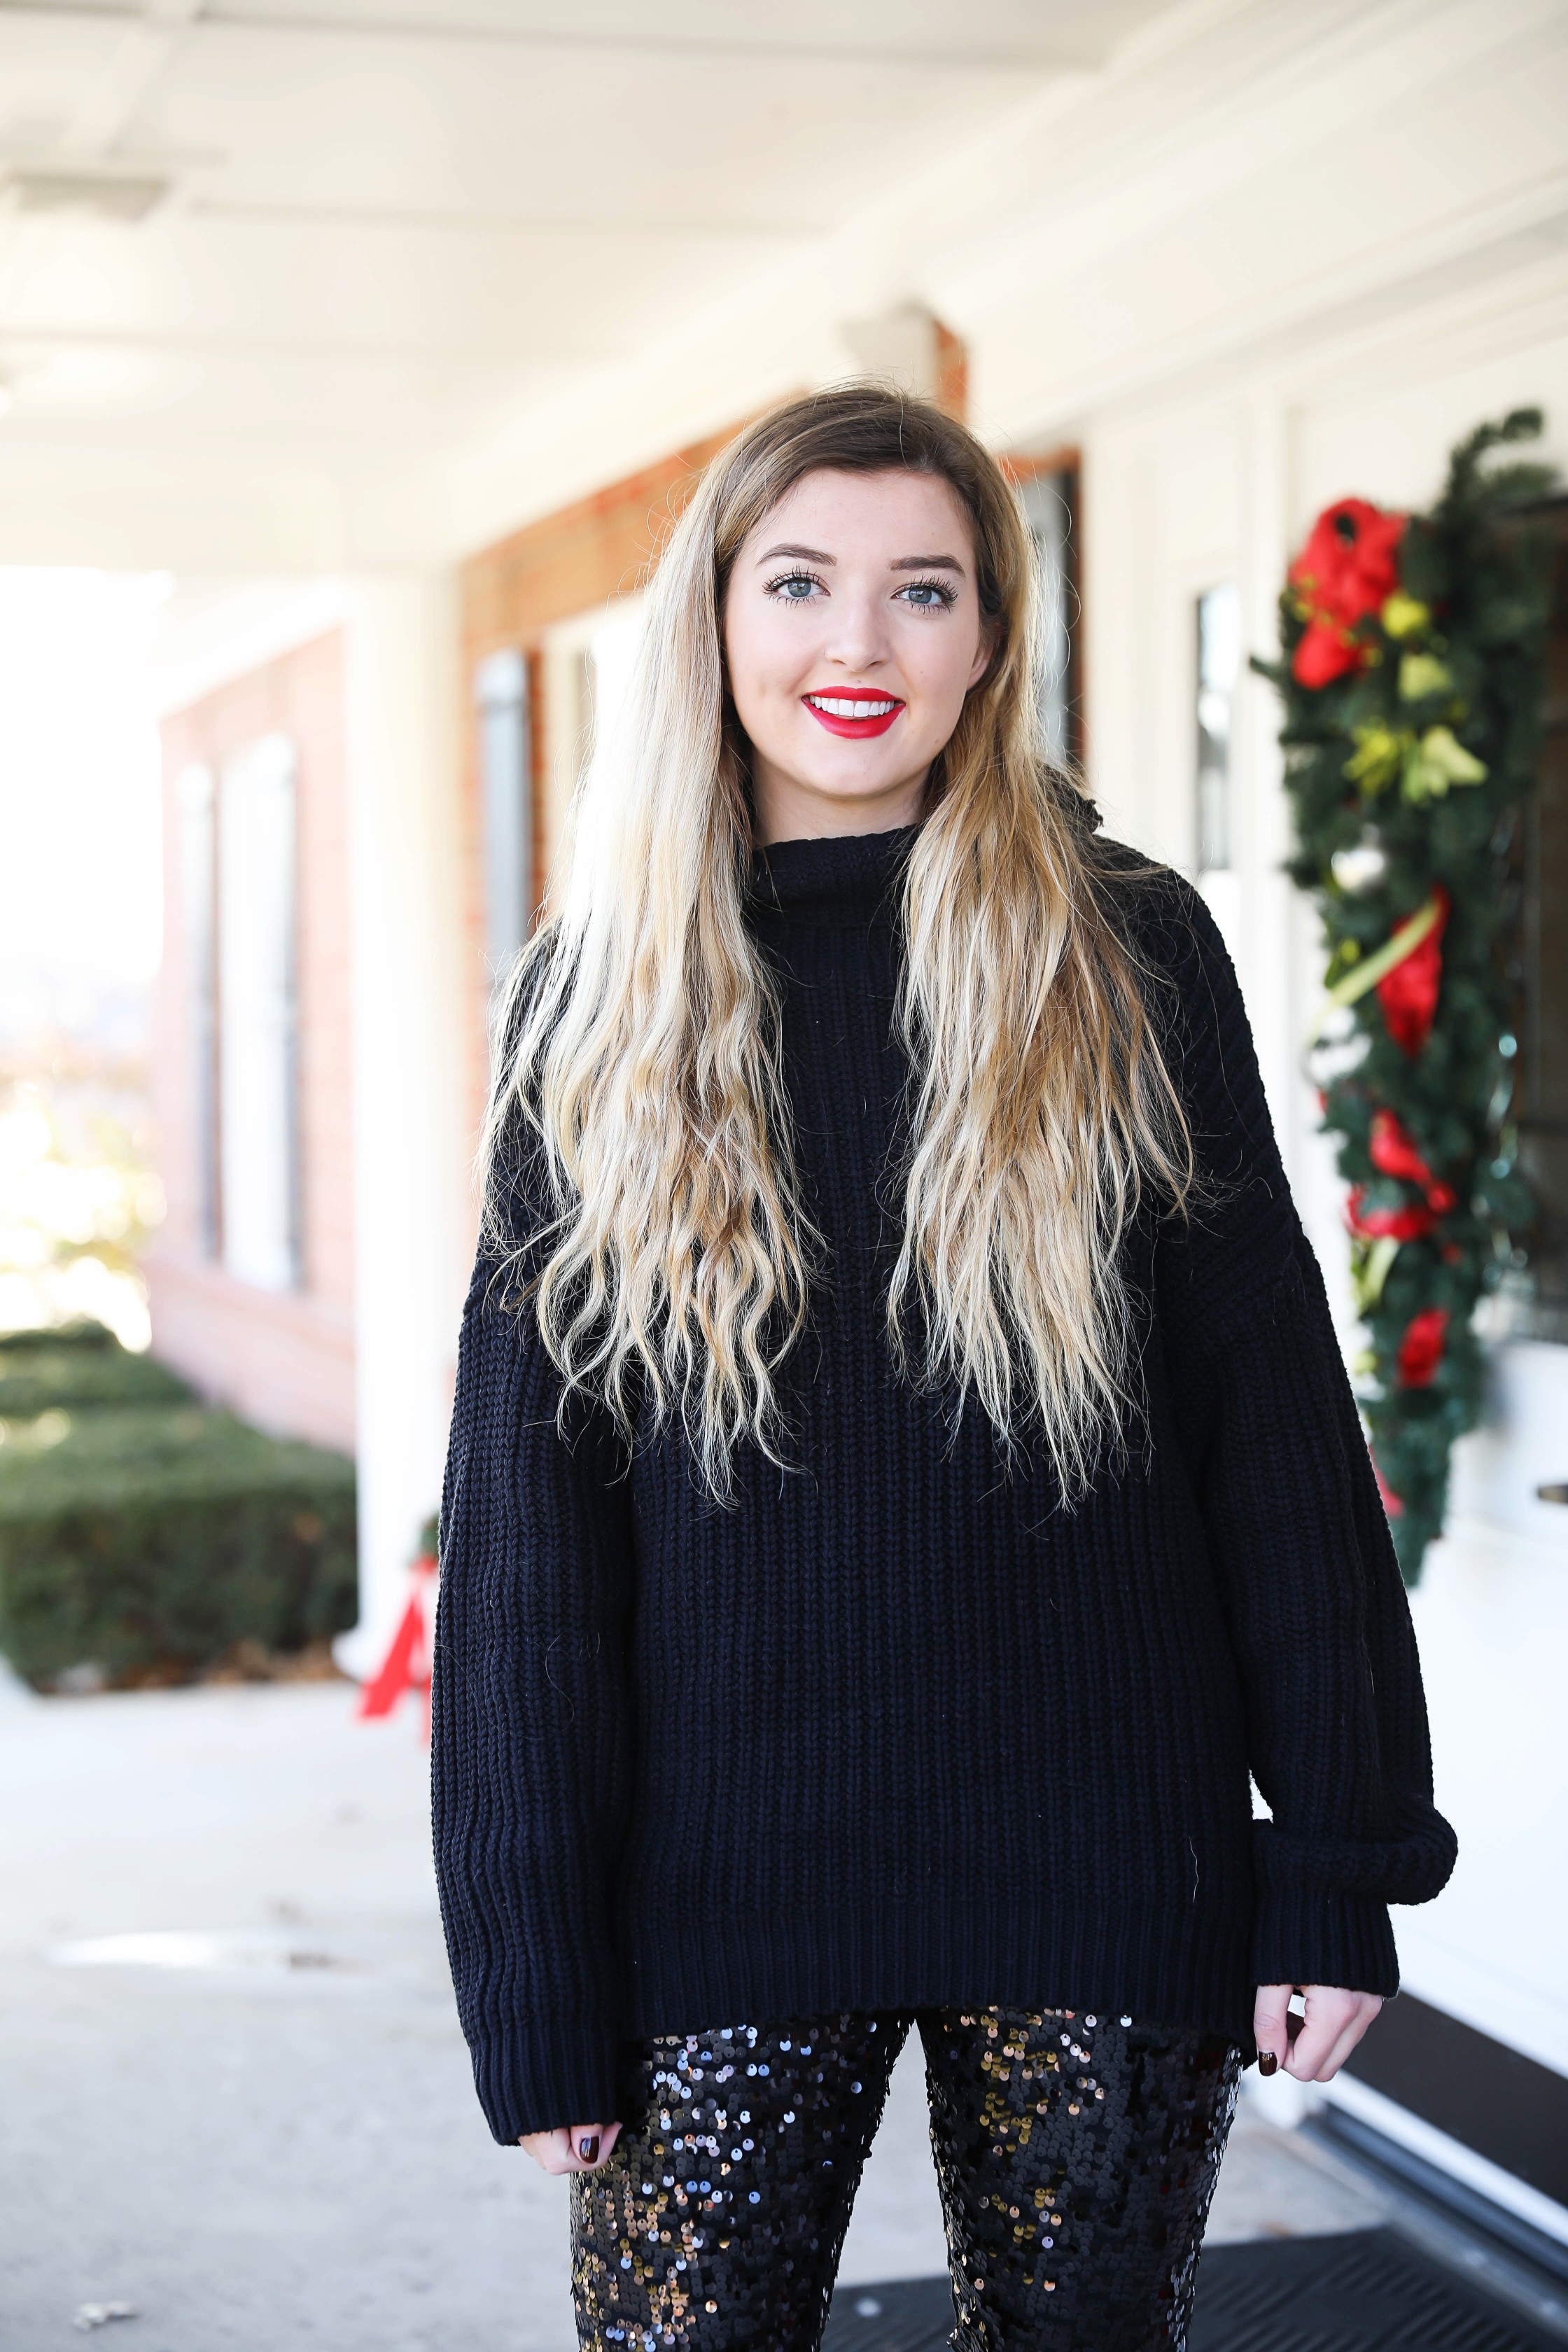 New Years eve outfit idea! Sequin pants and a black sweater, perfect for  NYE! How to style sequin pants for nye! Details on fashio blog daily dose  of charm by lauren lindmark –